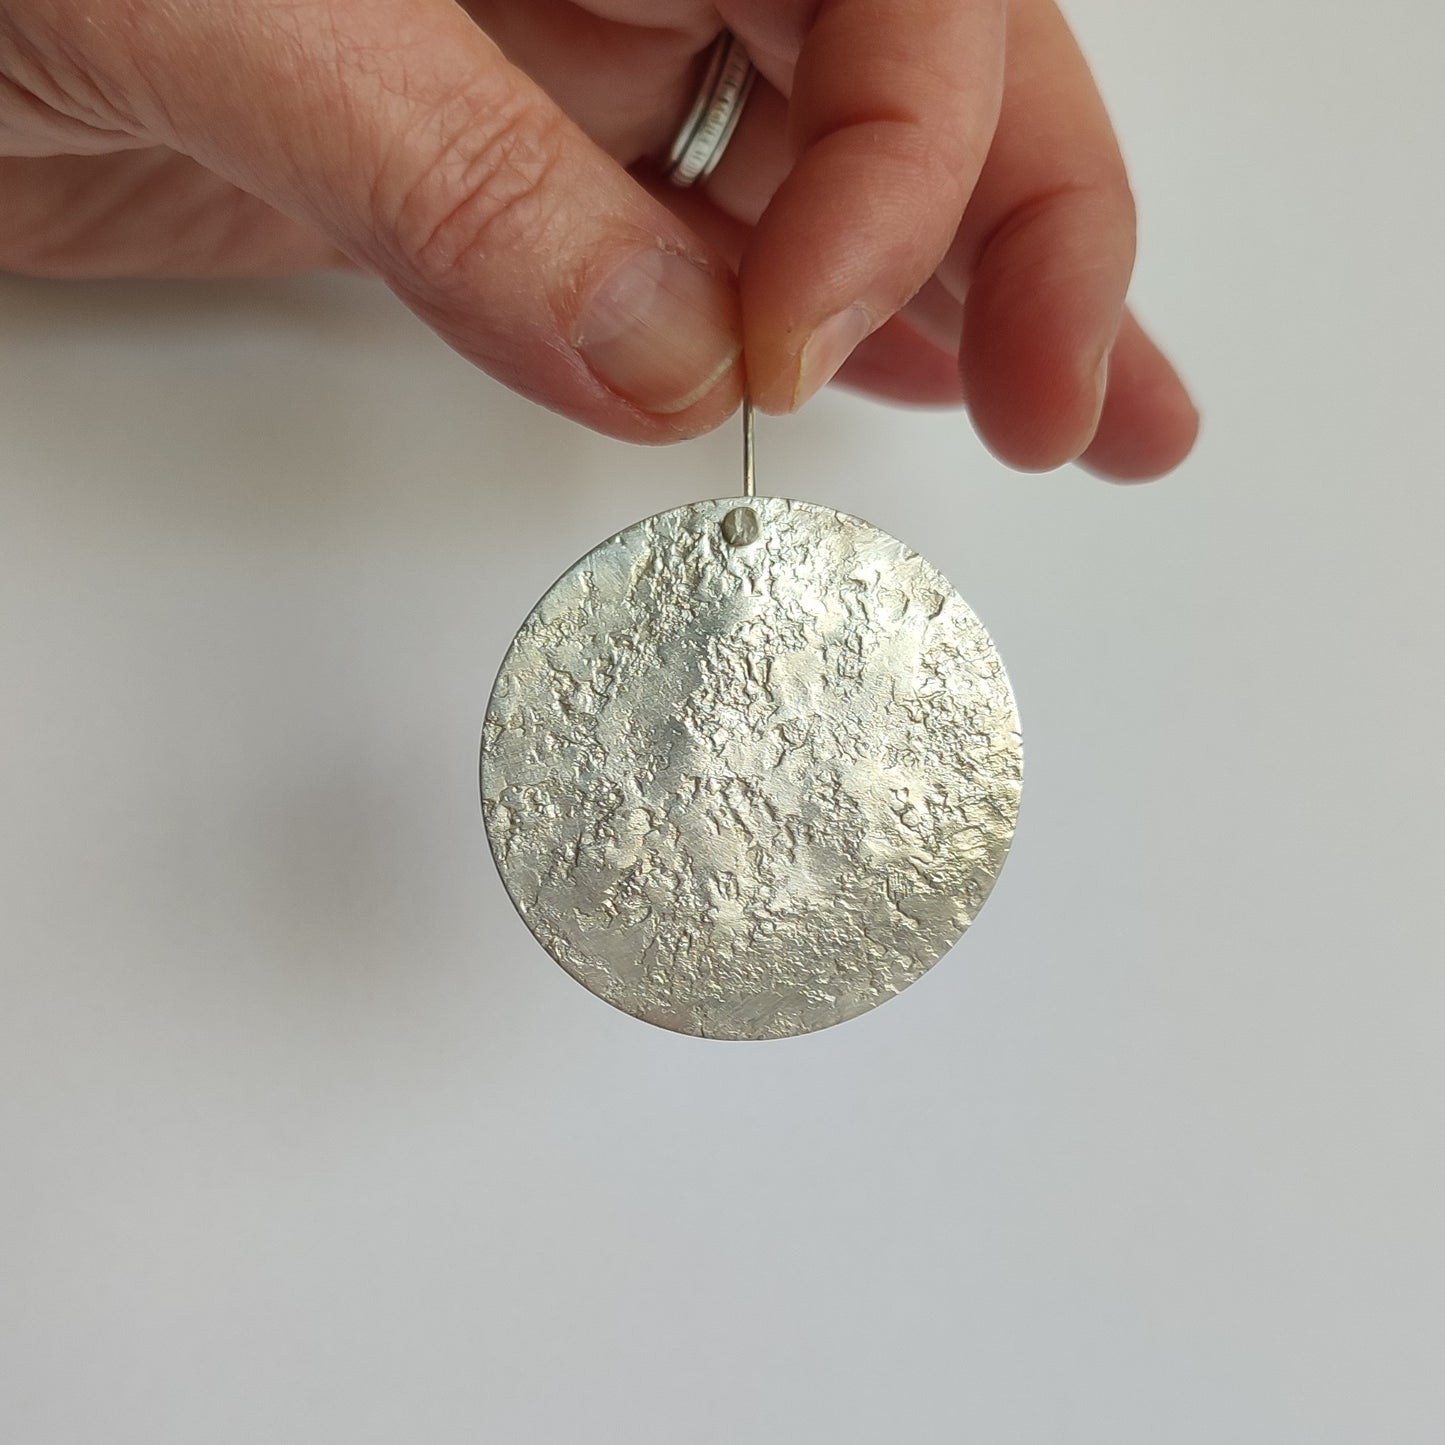 The maker's hand holding one big, round silver earring